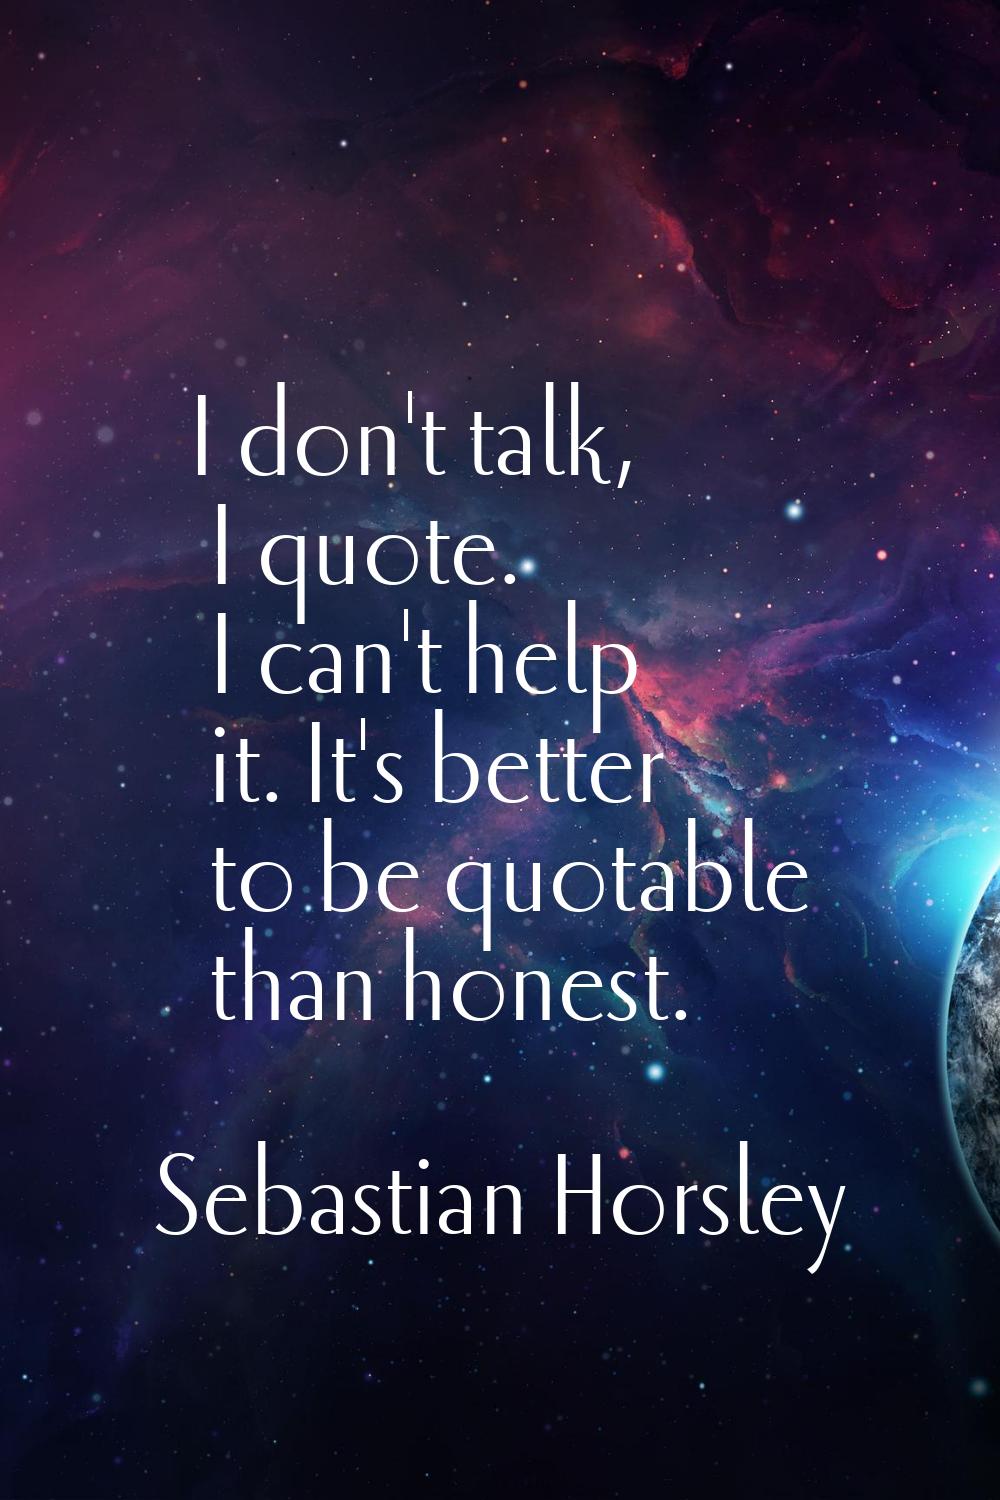 I don't talk, I quote. I can't help it. It's better to be quotable than honest.